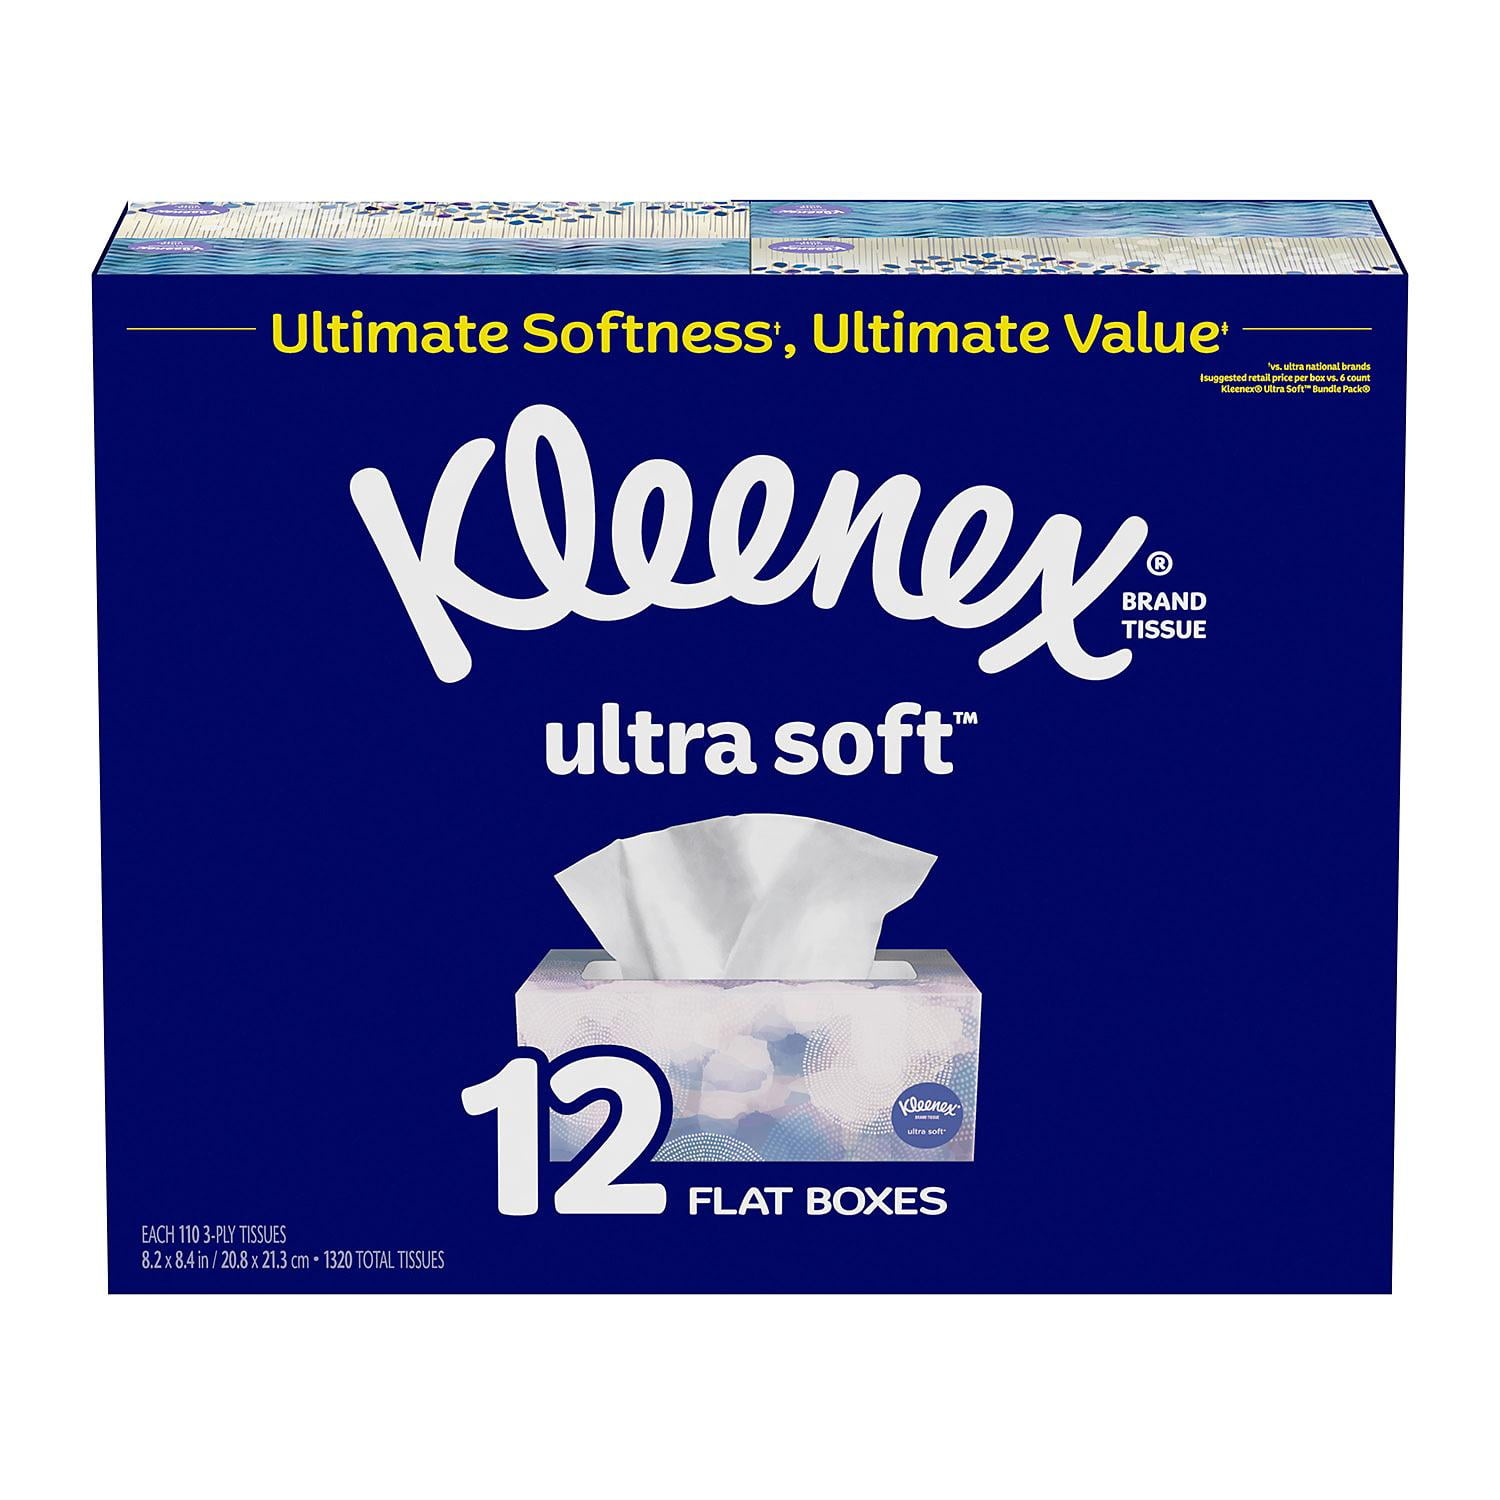 Kleenex Ultra Soft Facial Tissues Cube boxes 65 tissues per pack 12 pack 